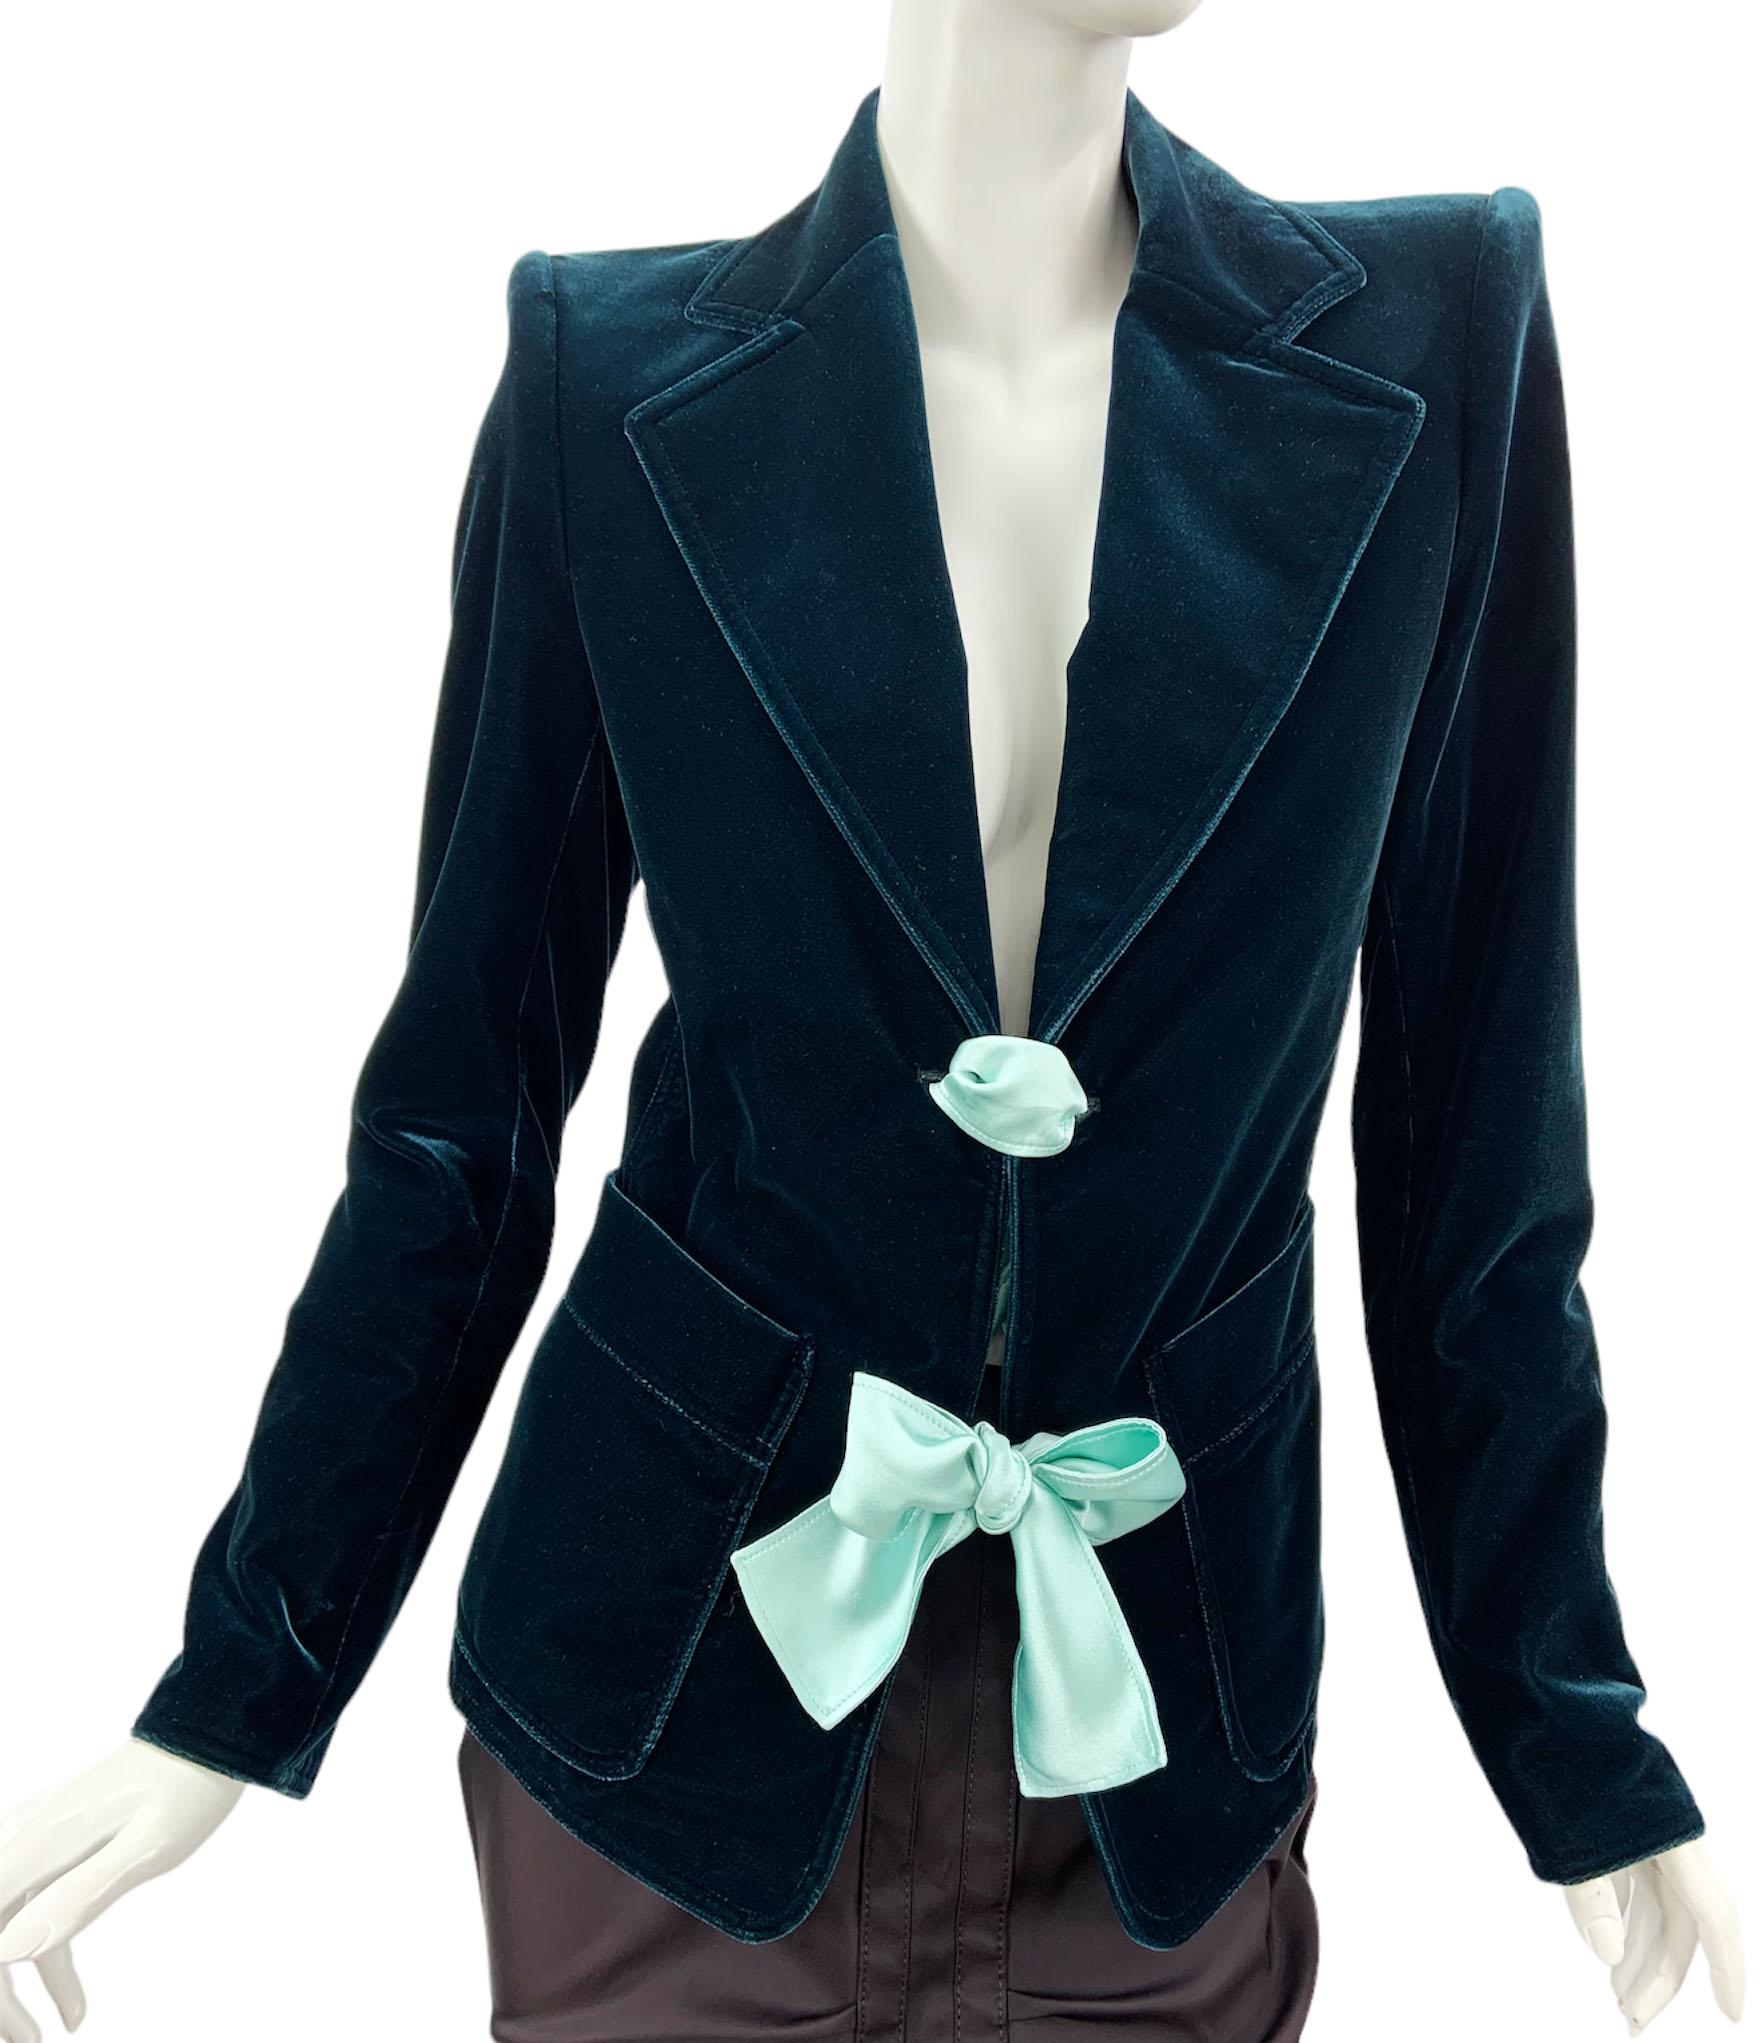 Tom Ford for Yves Saint Laurent Runway F/W 2003 Green Velvet Bow Blazer Jacket S In Excellent Condition For Sale In Montgomery, TX